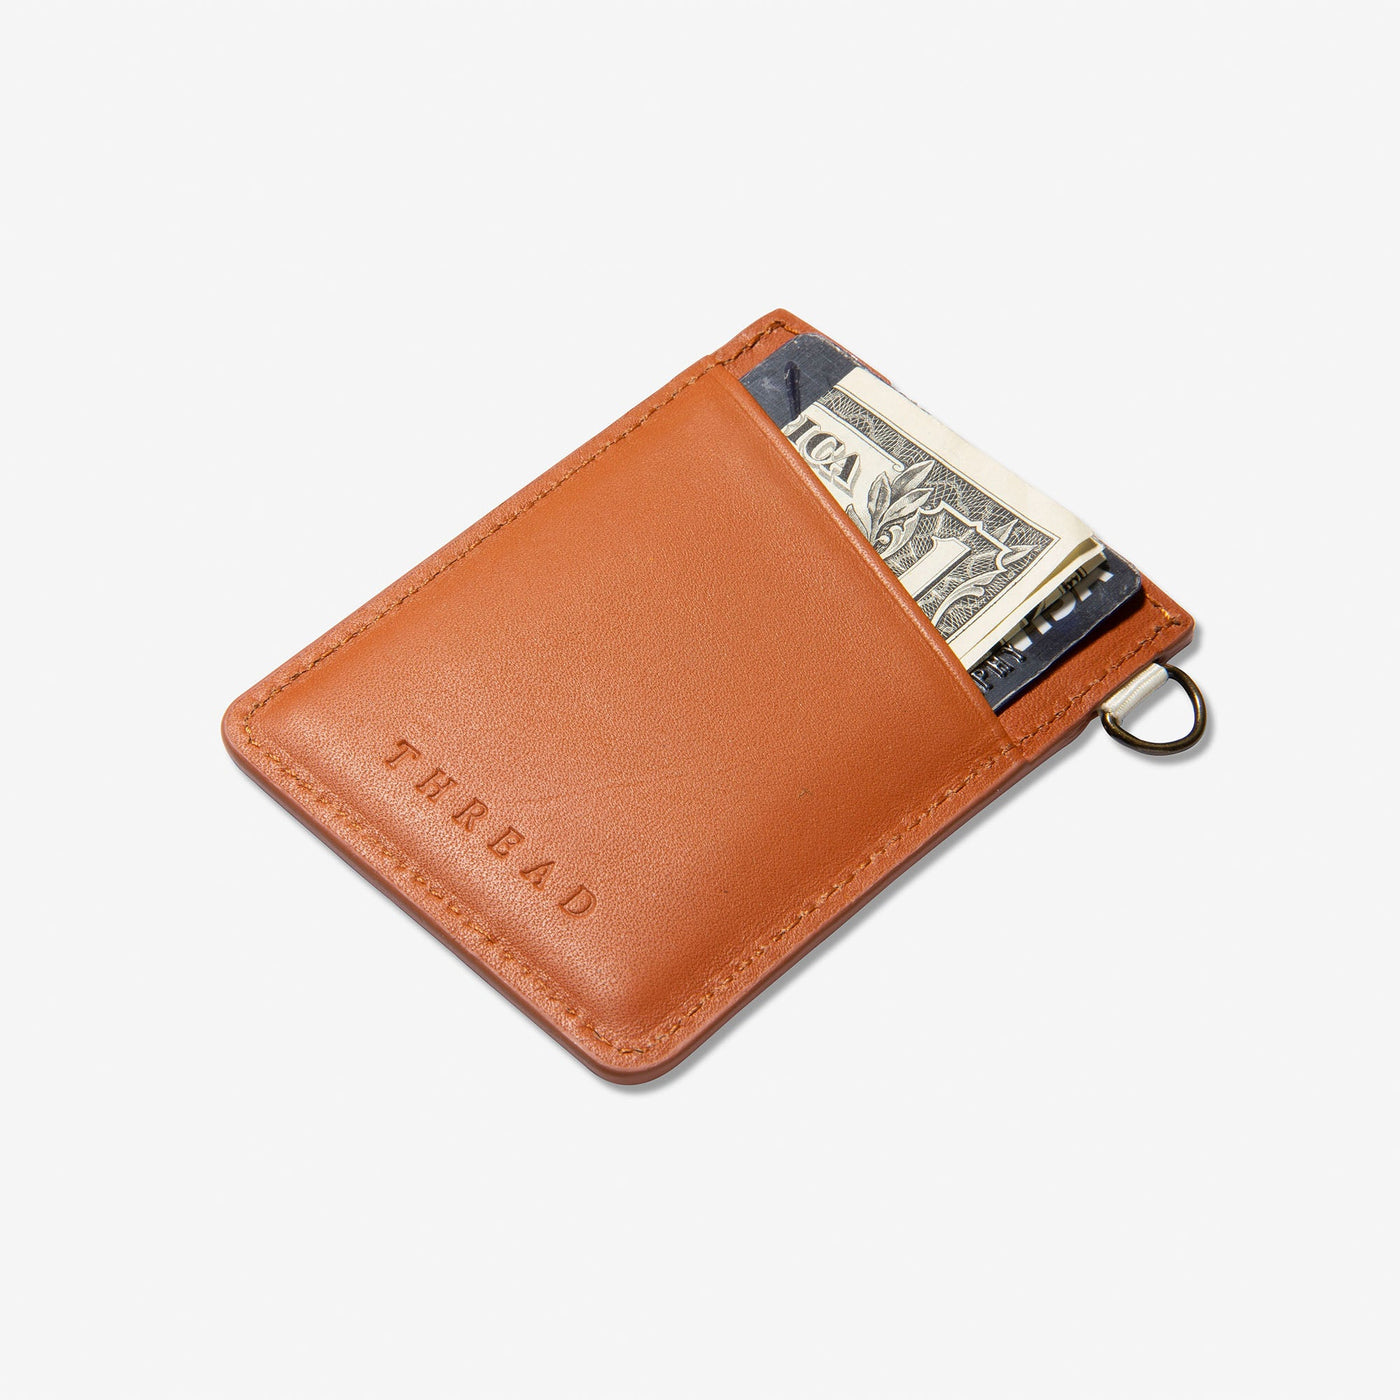 Brown leather vertical wallet with jewel-tone striped elastic